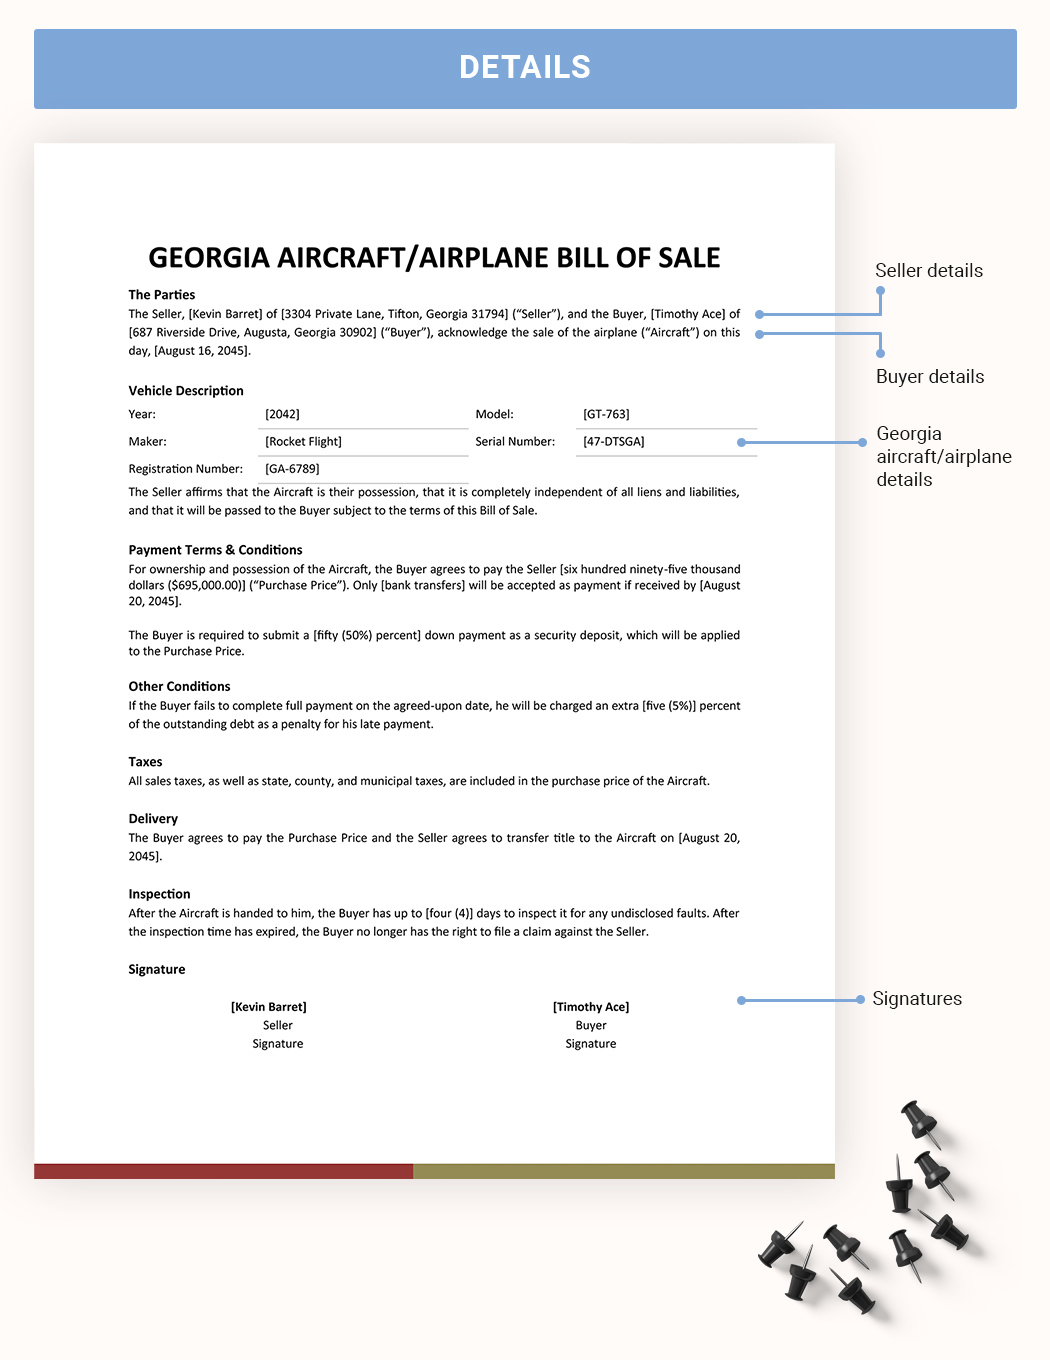 Georgia Aircraft / Airplane Bill of Sale Form Template